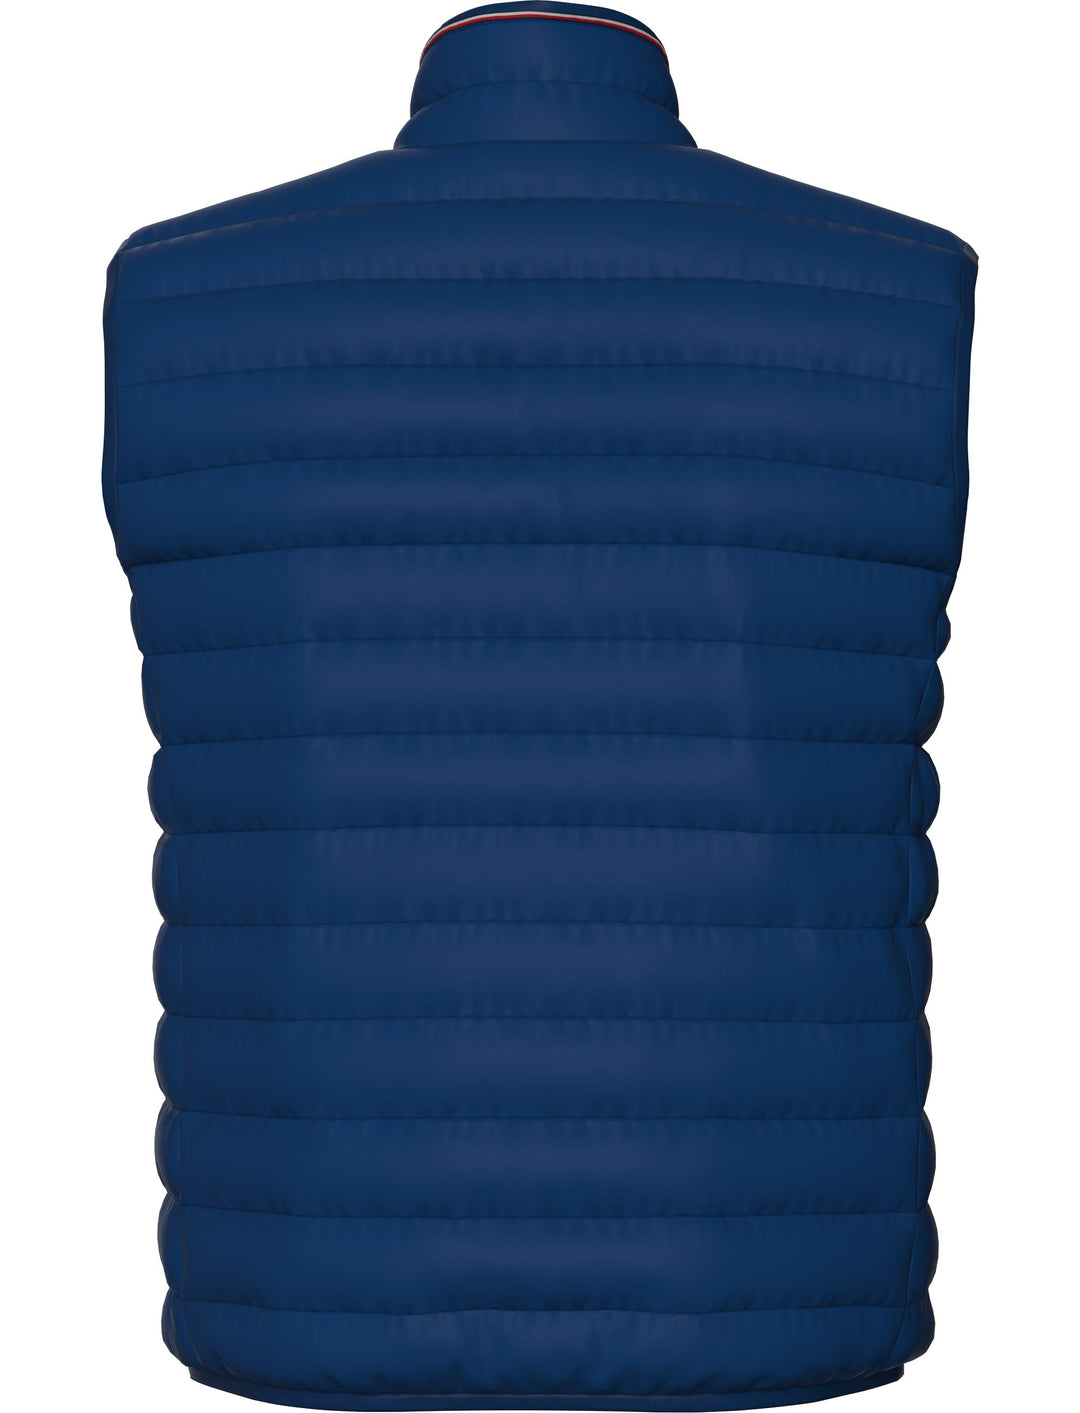 TH PACKABLE RECYCLED VEST - DEEP INDIGO